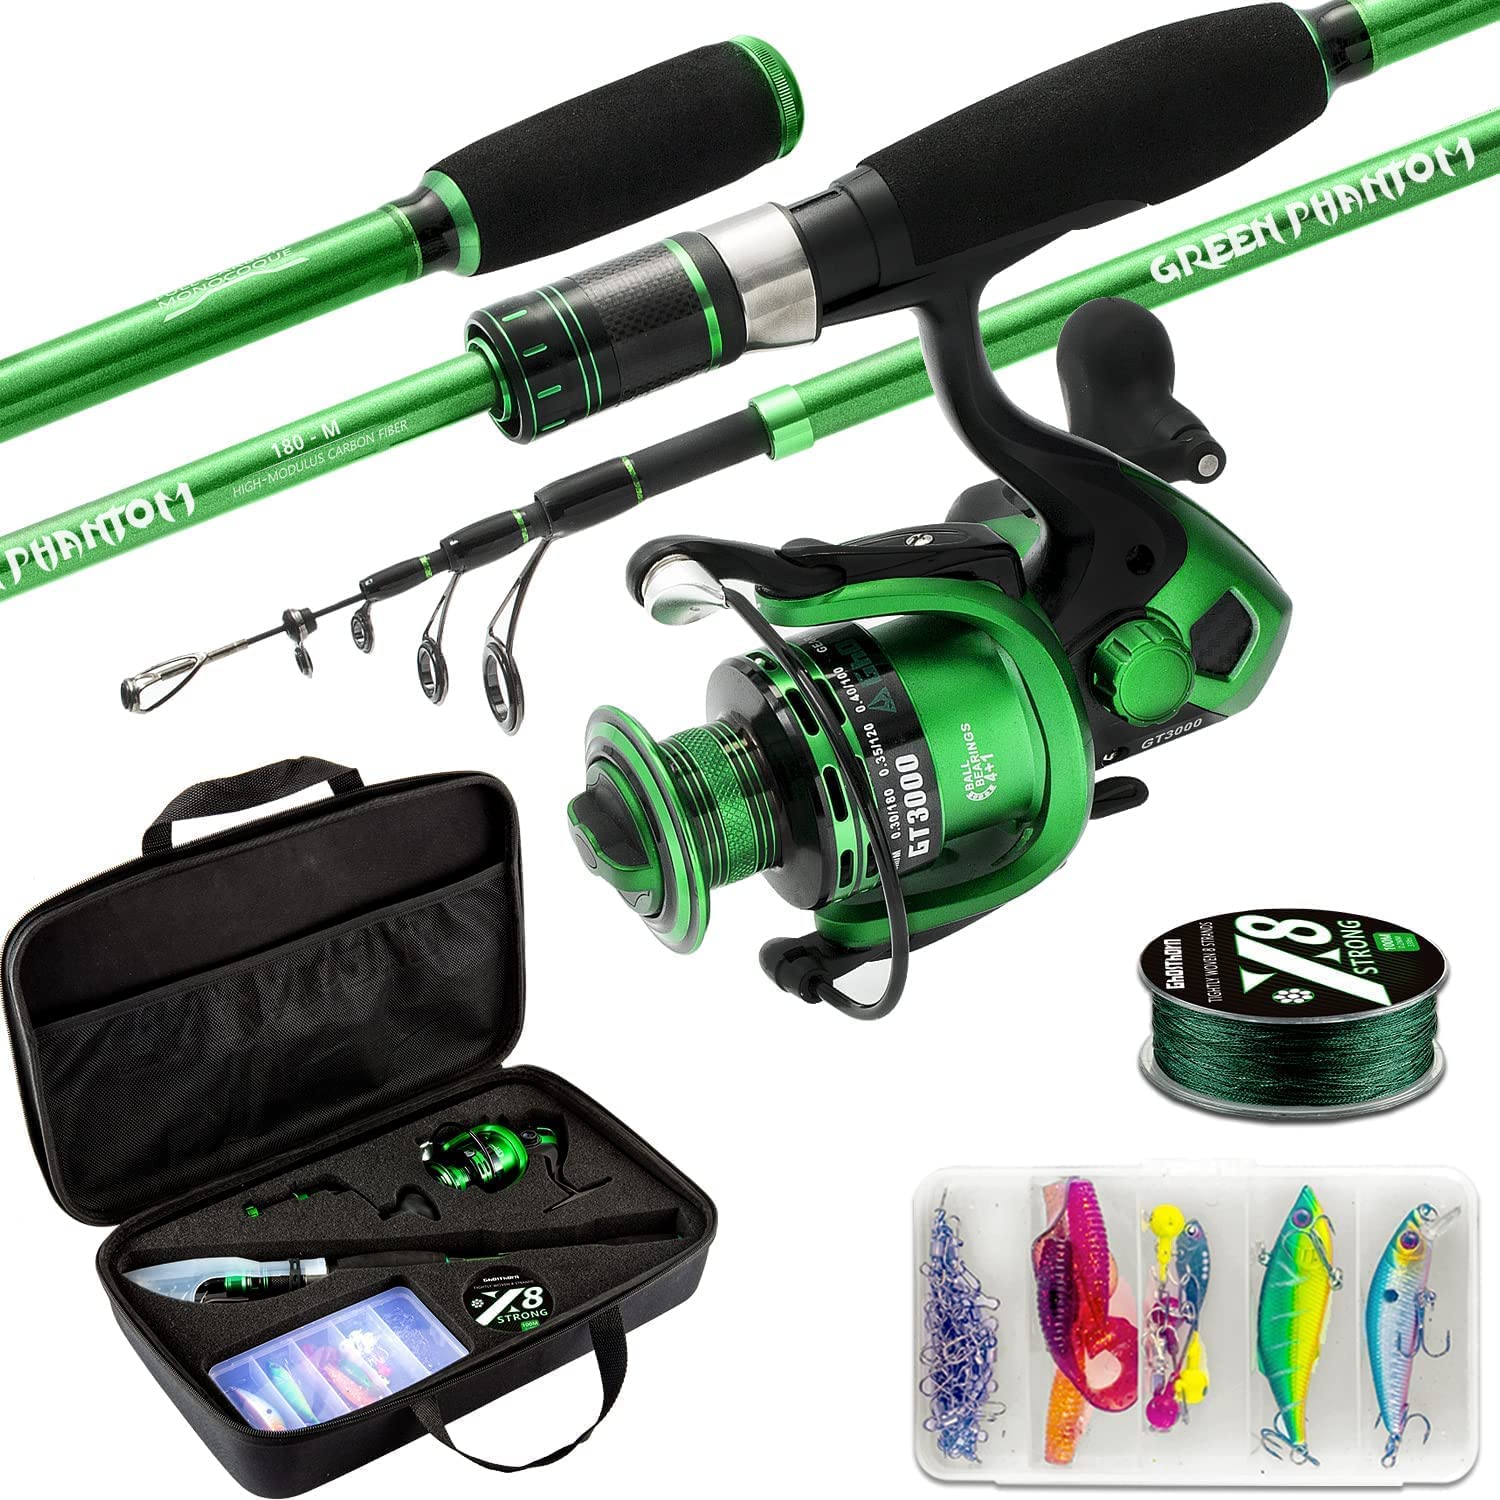 Best Fishing Rod To Improve Your Fishing Experience